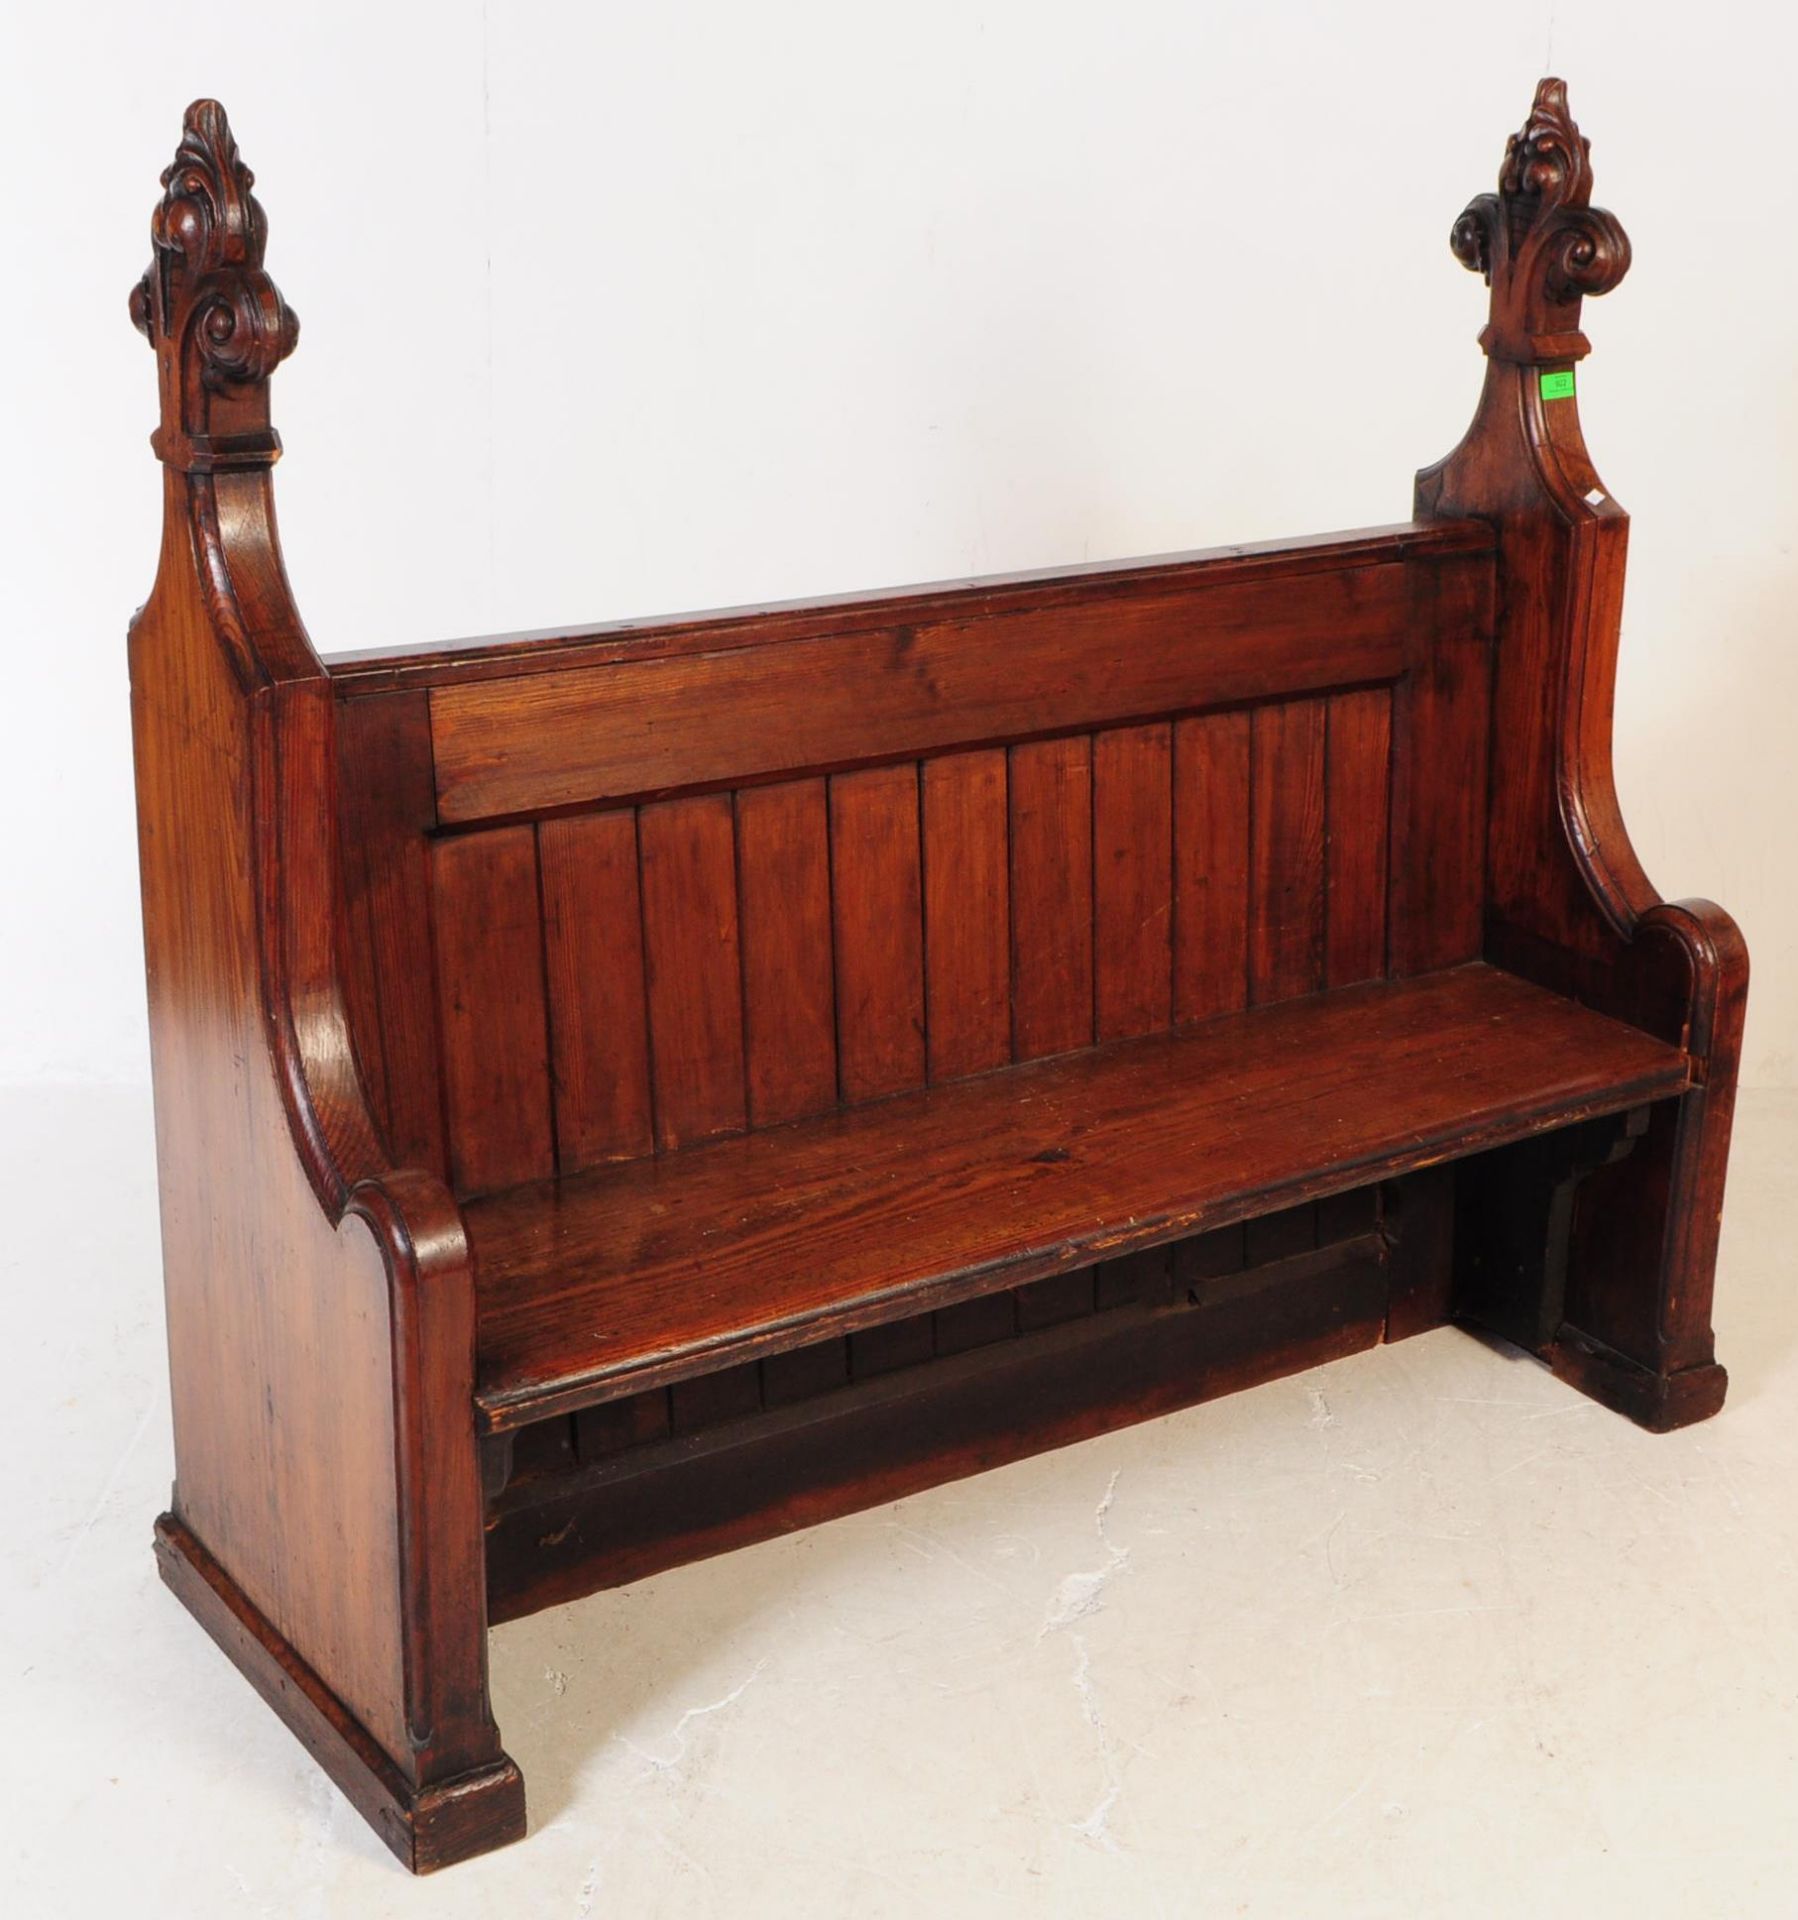 VICTORIAN 19TH CENTURY OAK ECCLESIASTICAL GOTHIC BENCH - Image 2 of 8